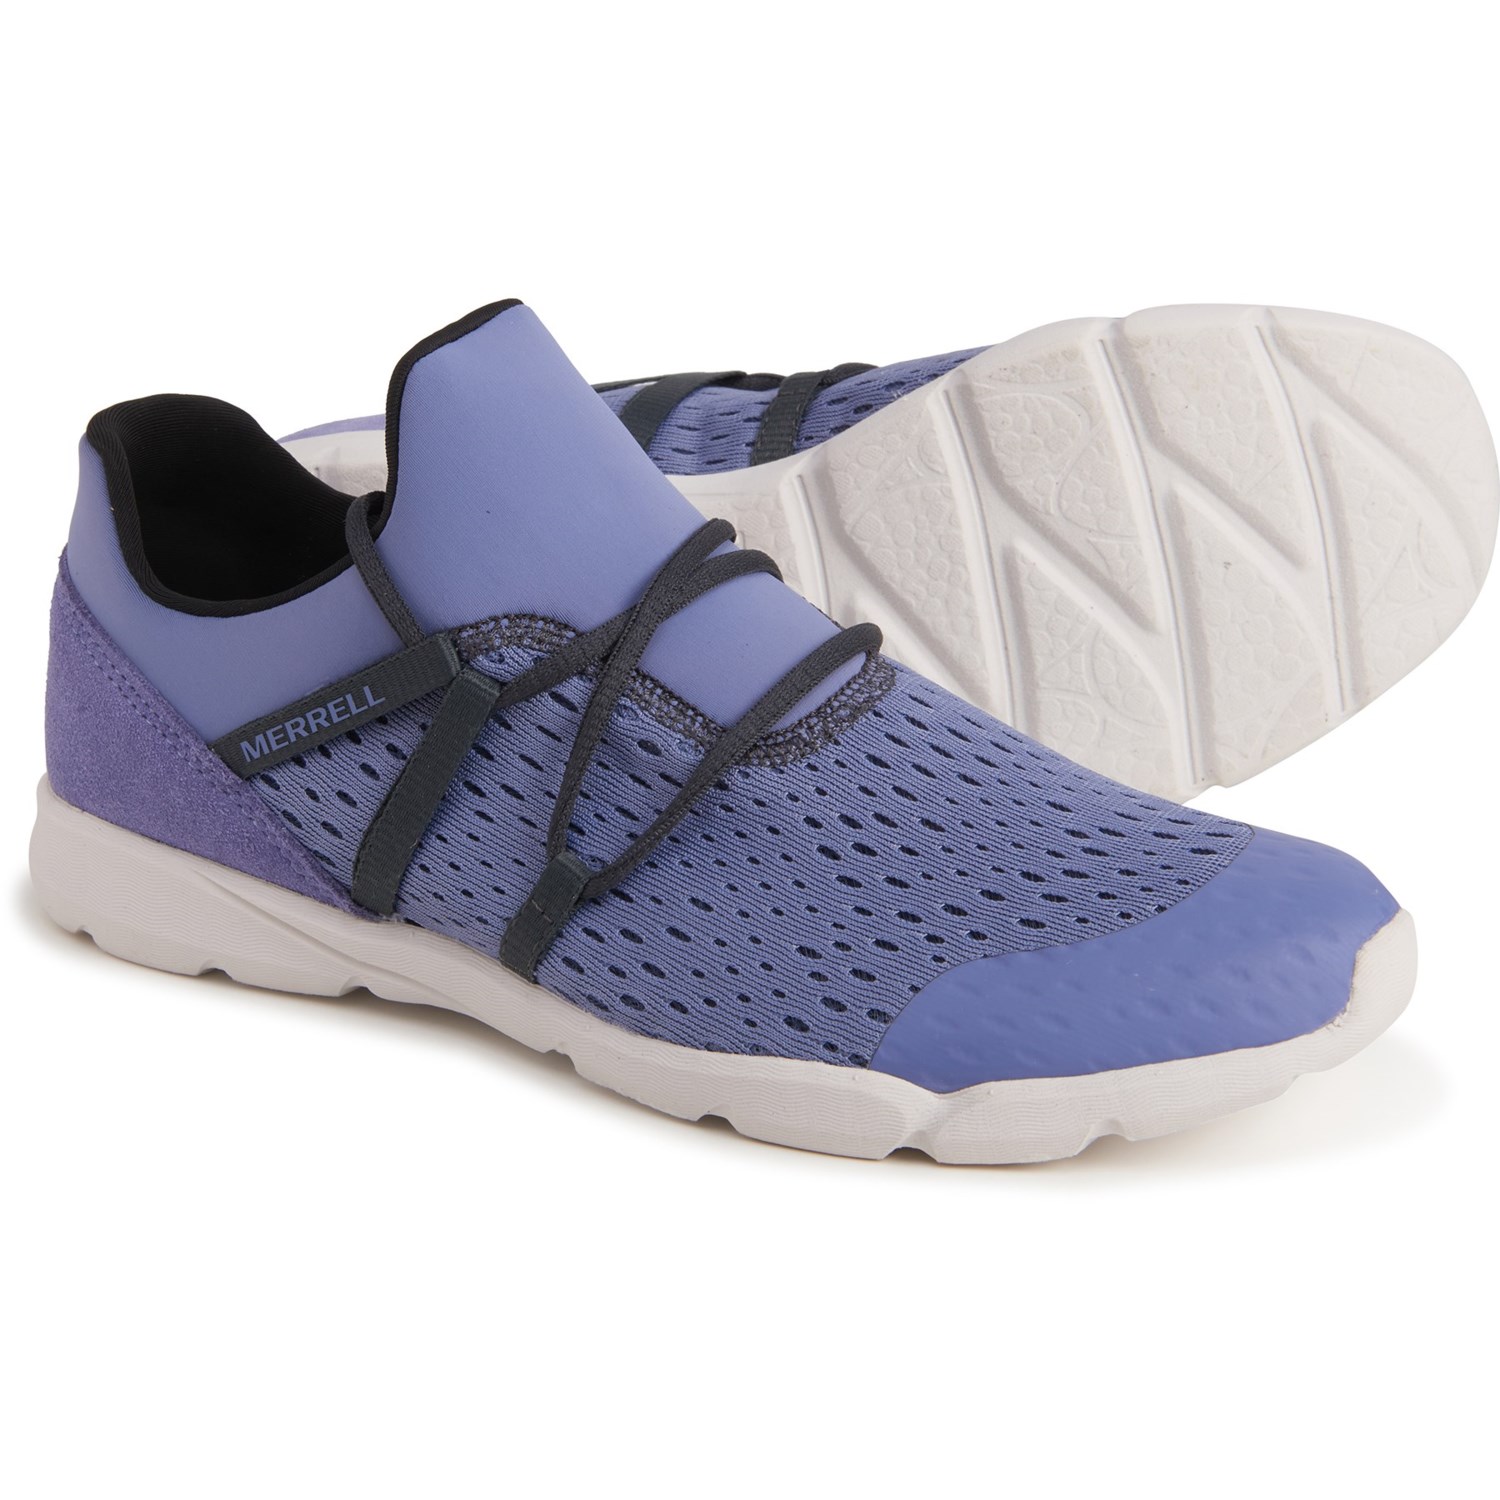 merrell athletic shoes womens